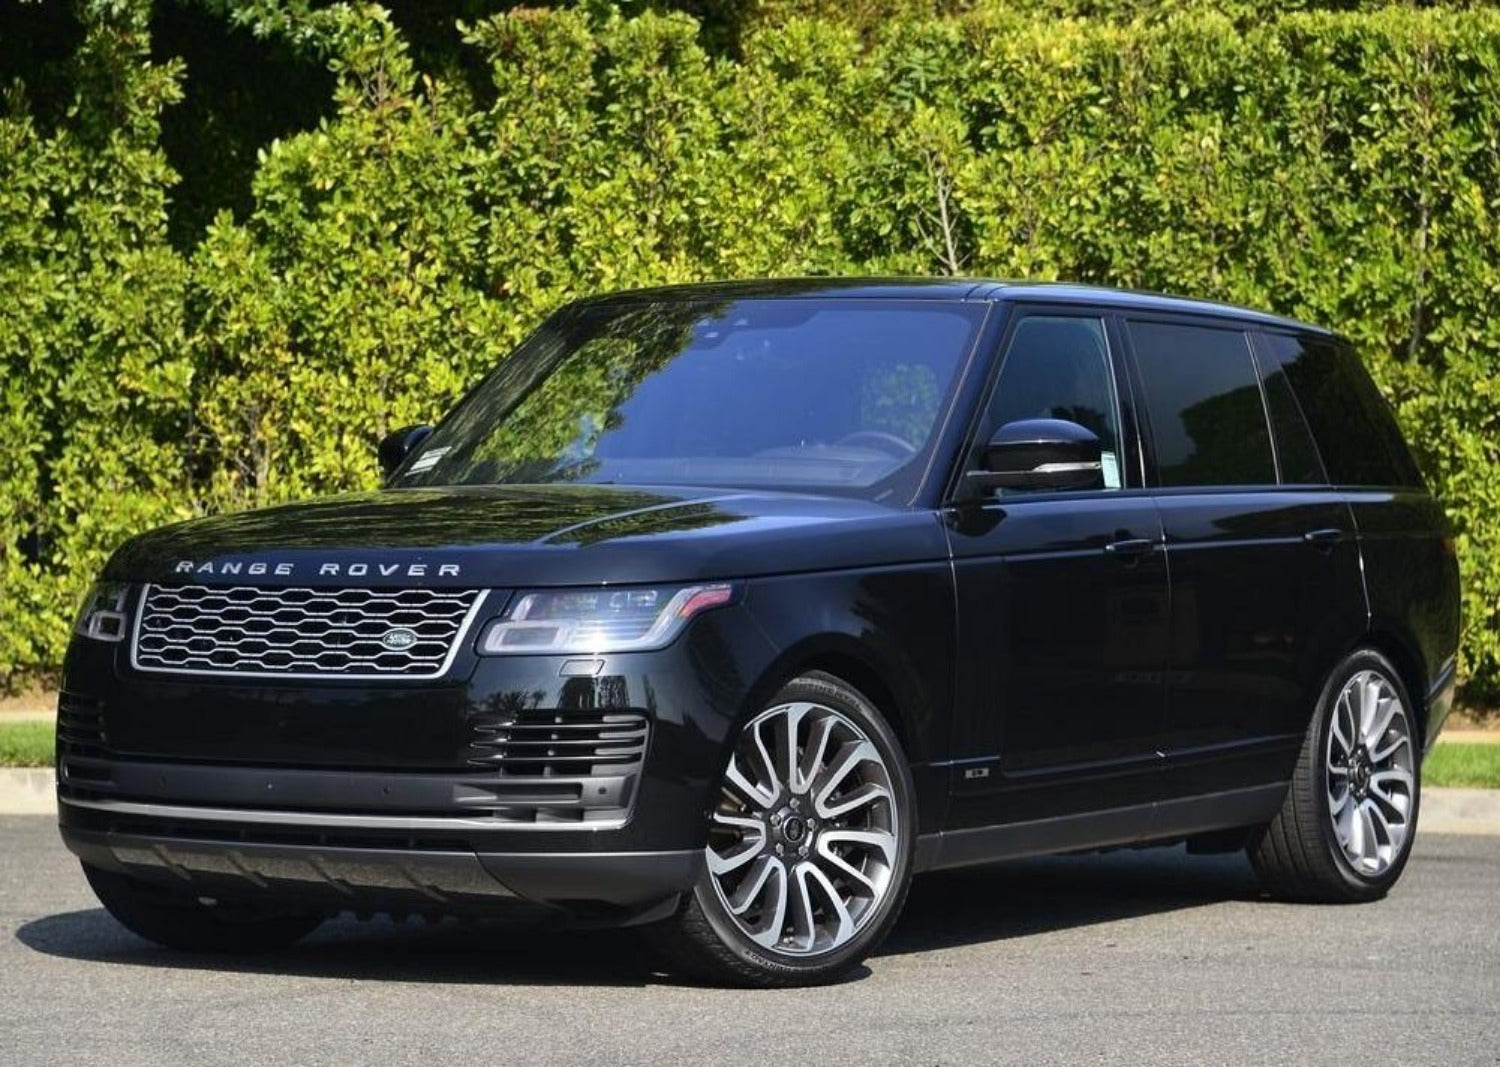 RANGE ROVER SUPERCHARGED LWB